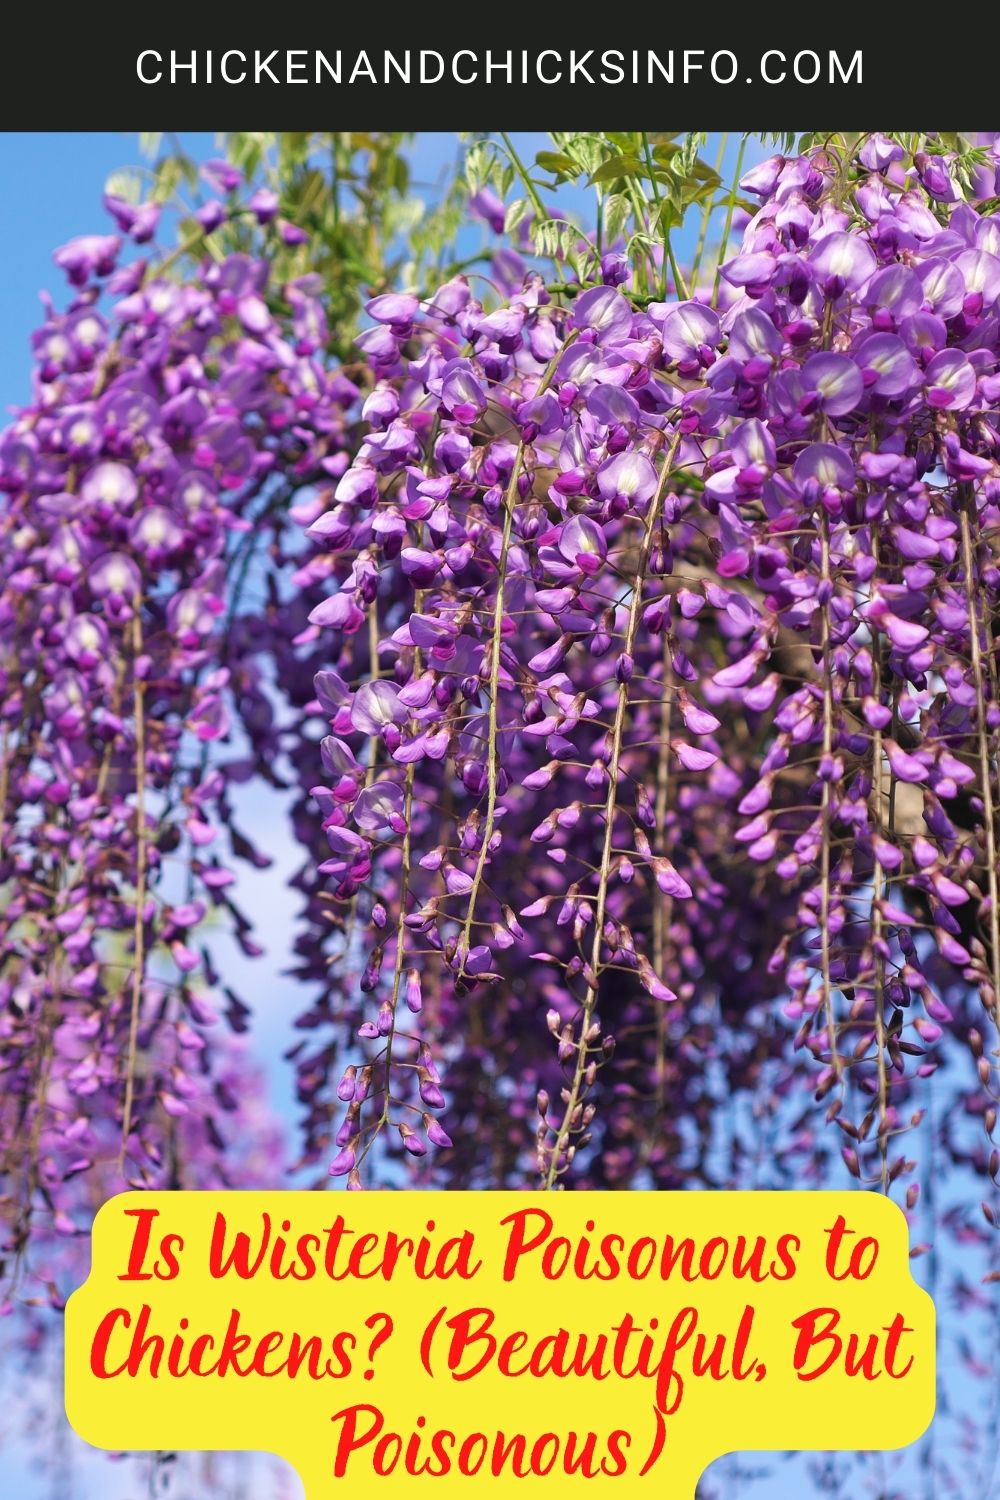 Is Wisteria Poisonous to Chickens? (Beautiful, But Poisonous) poster.
